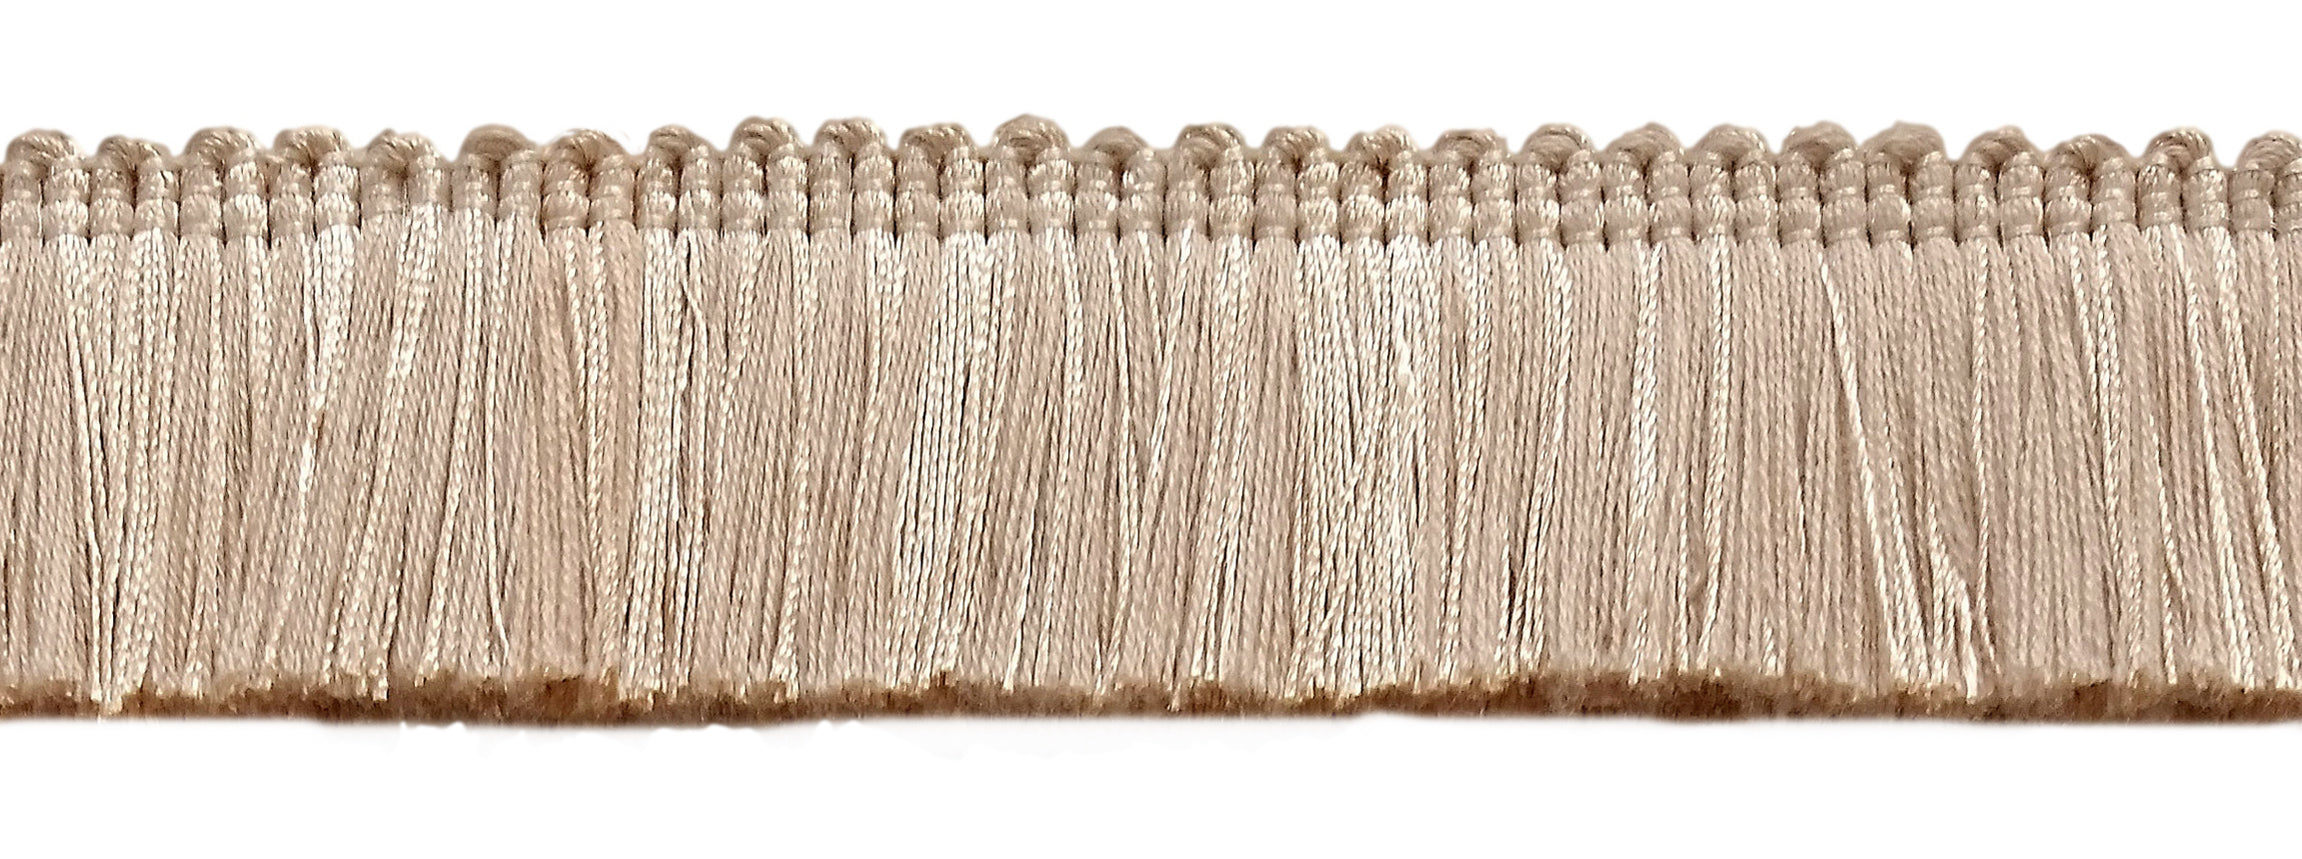 White, 1 3/4 inch Basic Trim Brush Fringe Style#0175SB Color: White - A1 (Sold by The Yard)